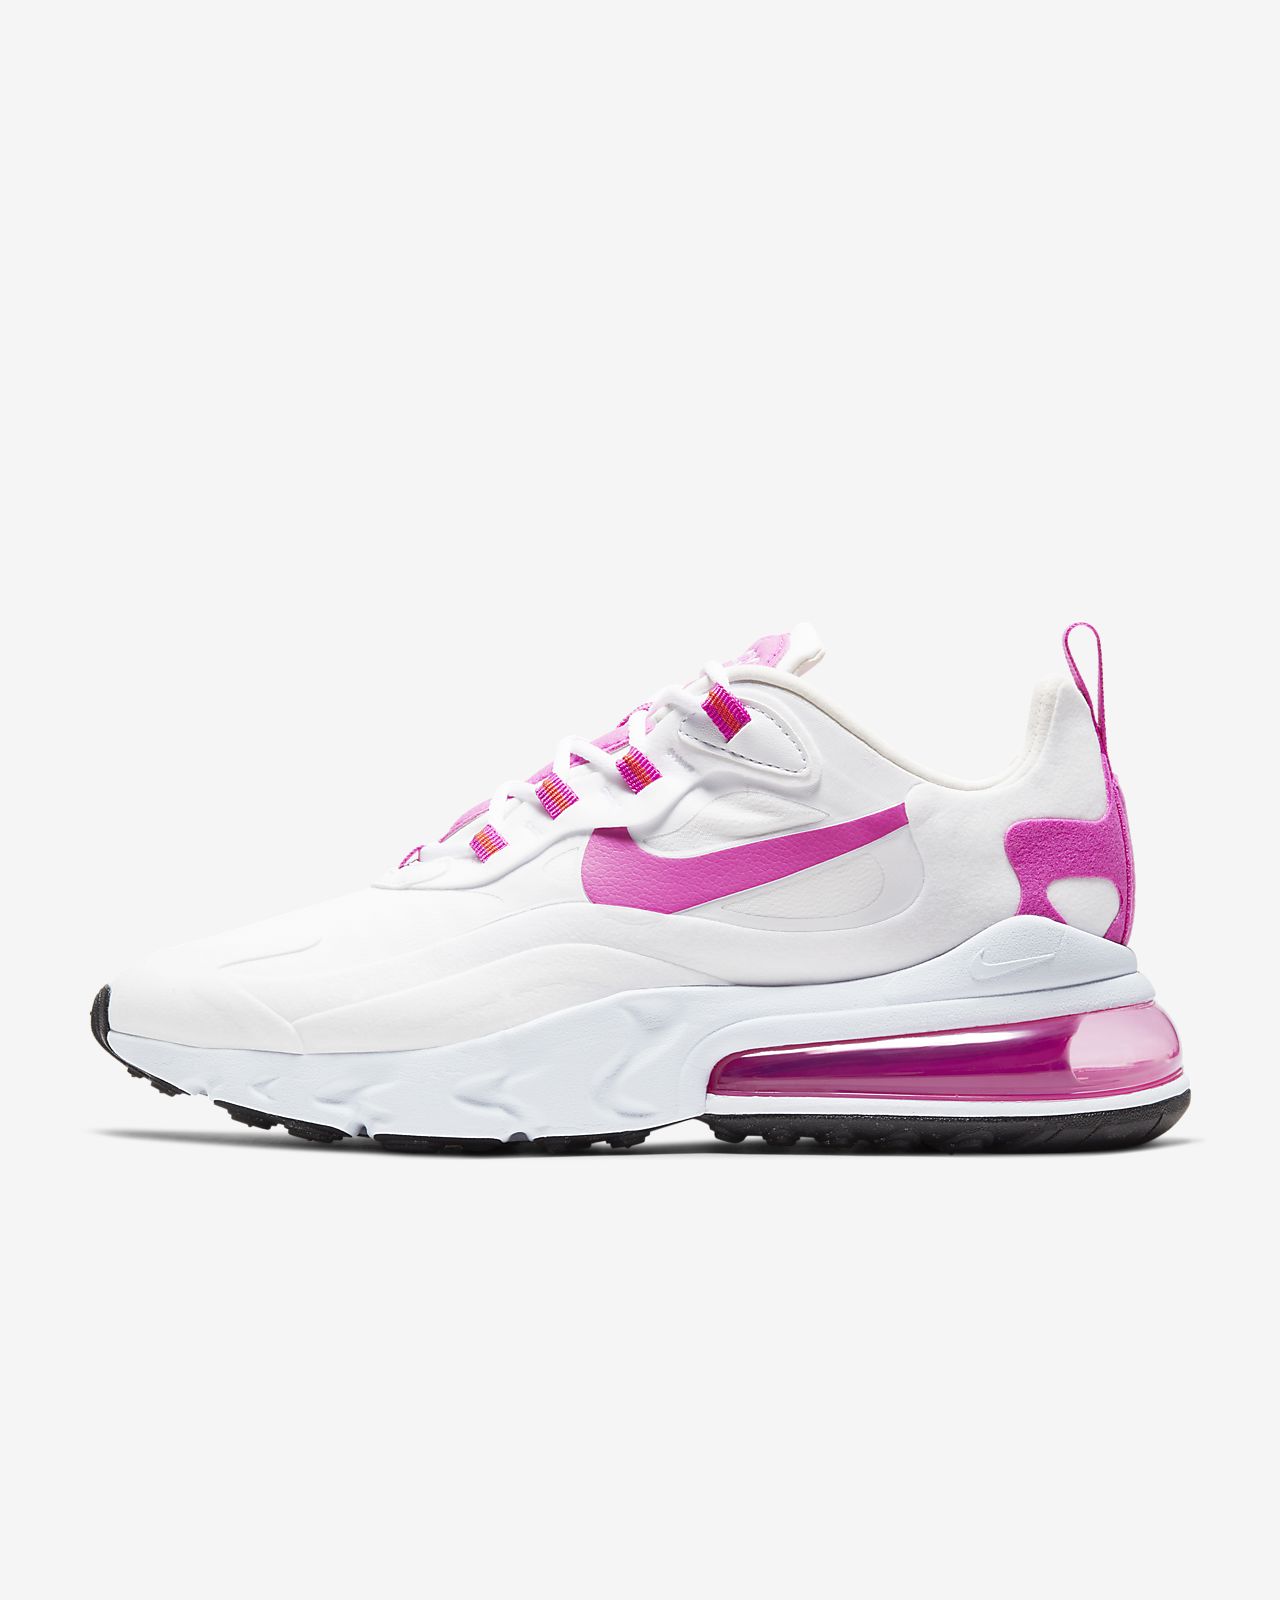 pink and white nike 270 womens